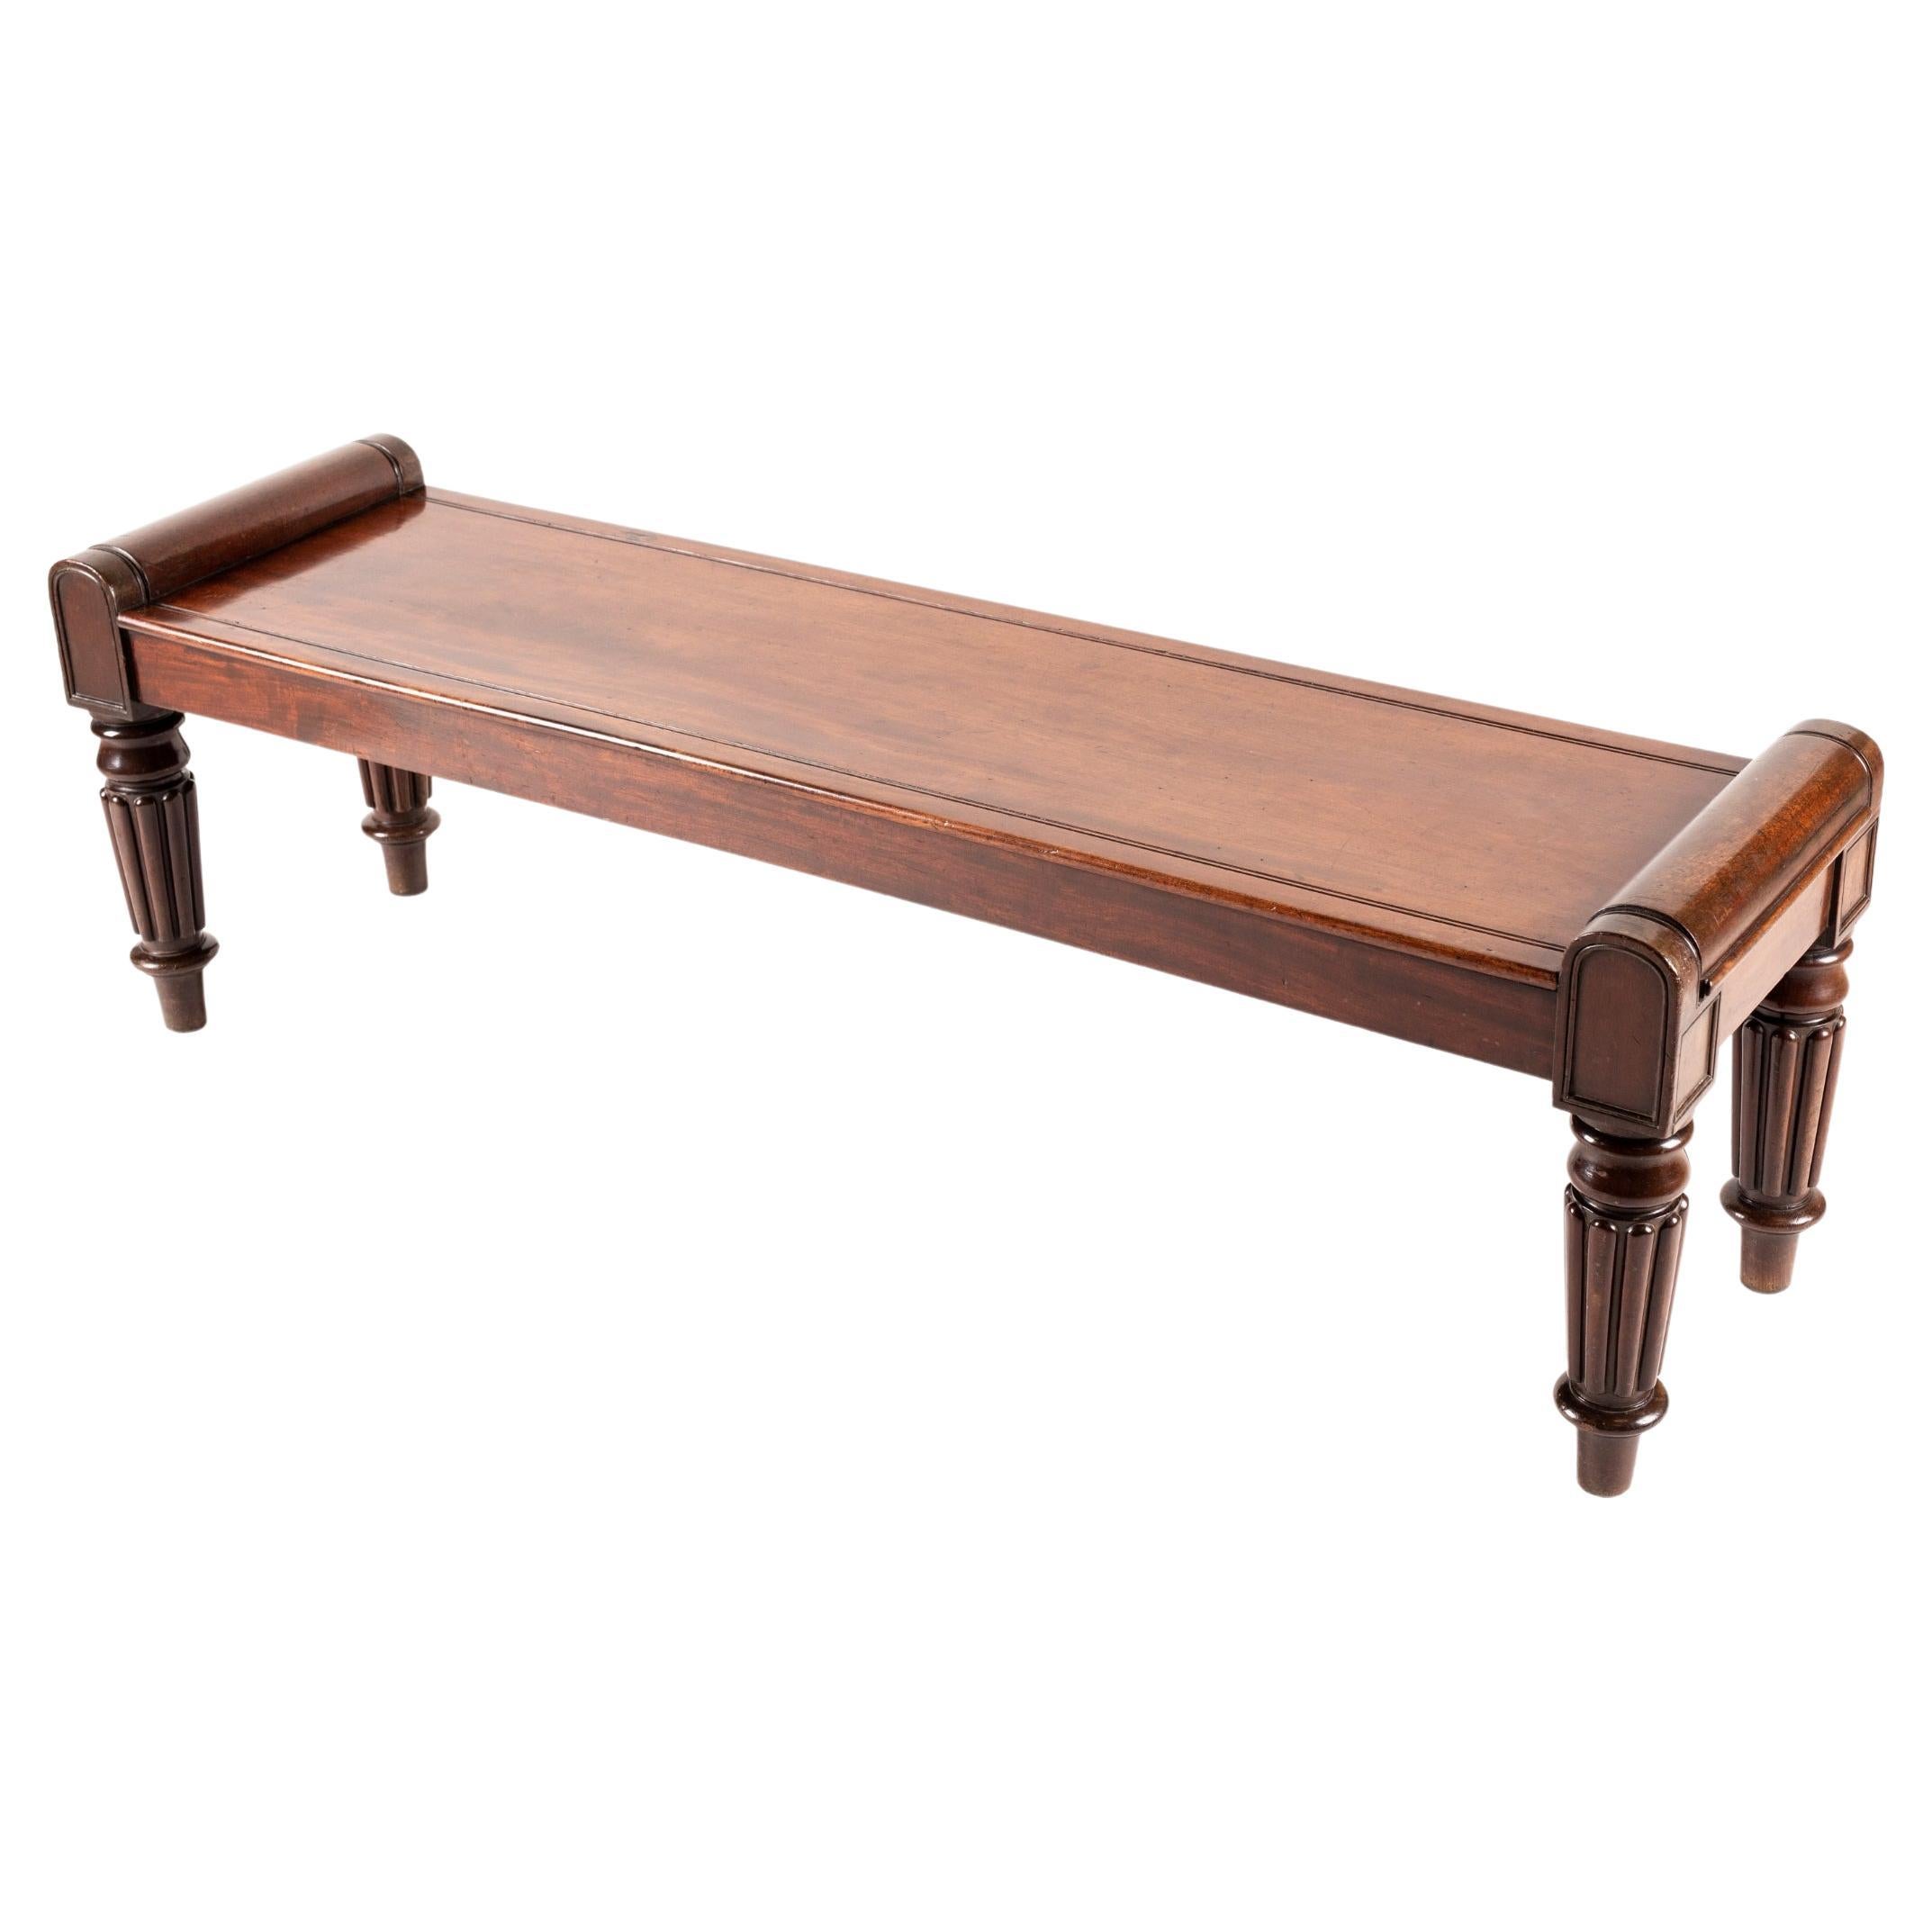 Late Georgian Solid Mahogany Bench with Carved Legs